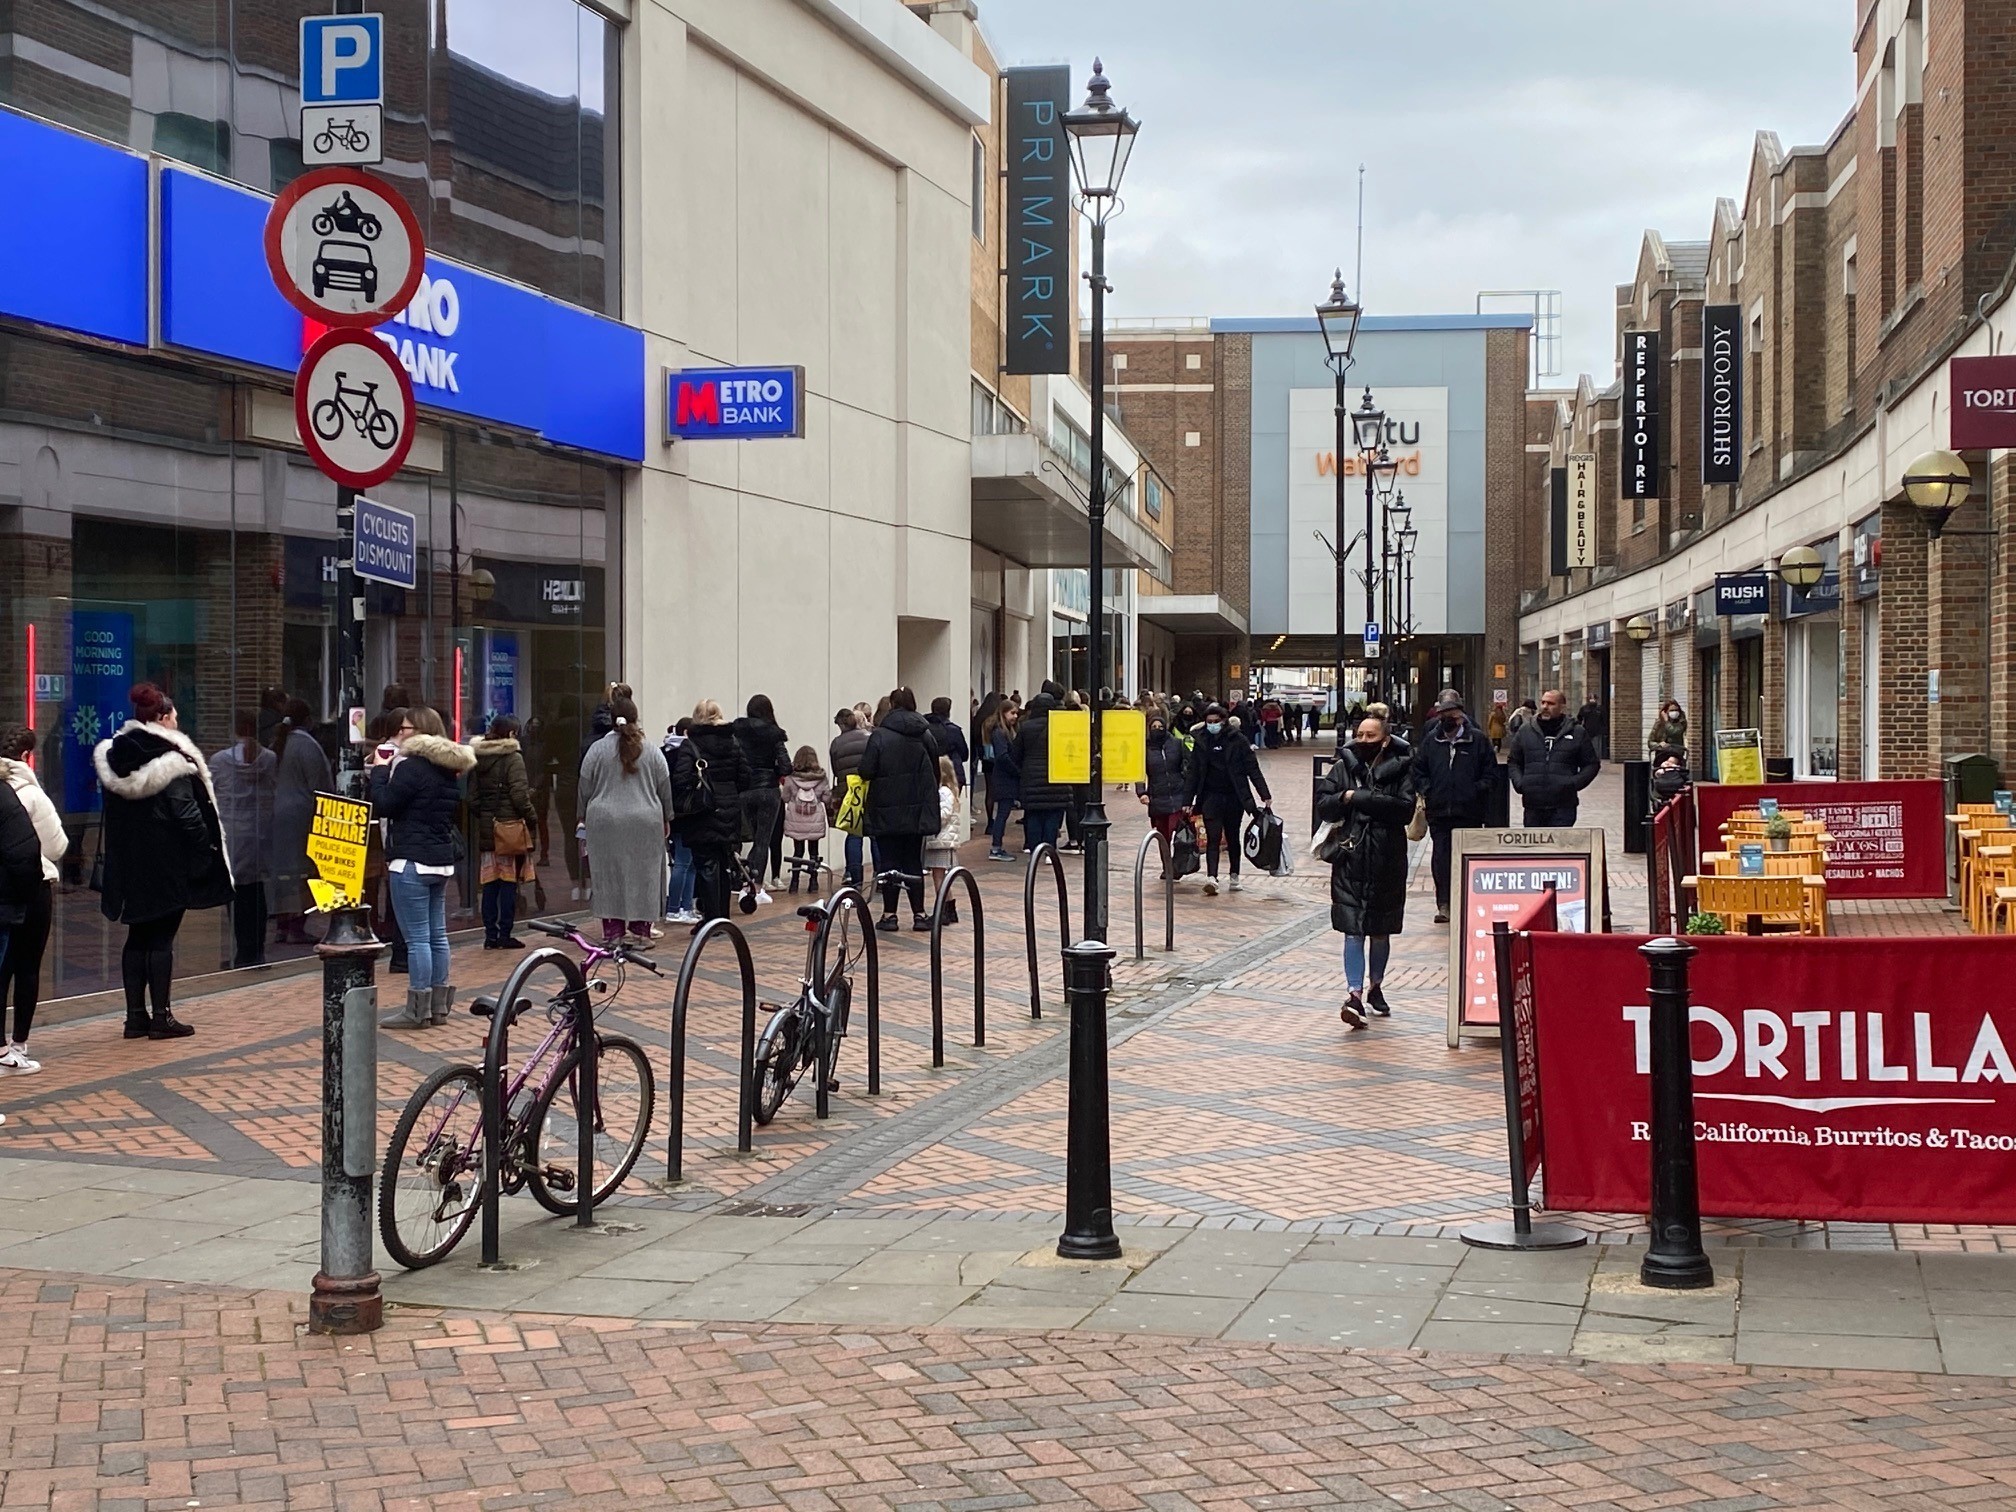 More than 100 people were queueing outside Primark at one point on Monday